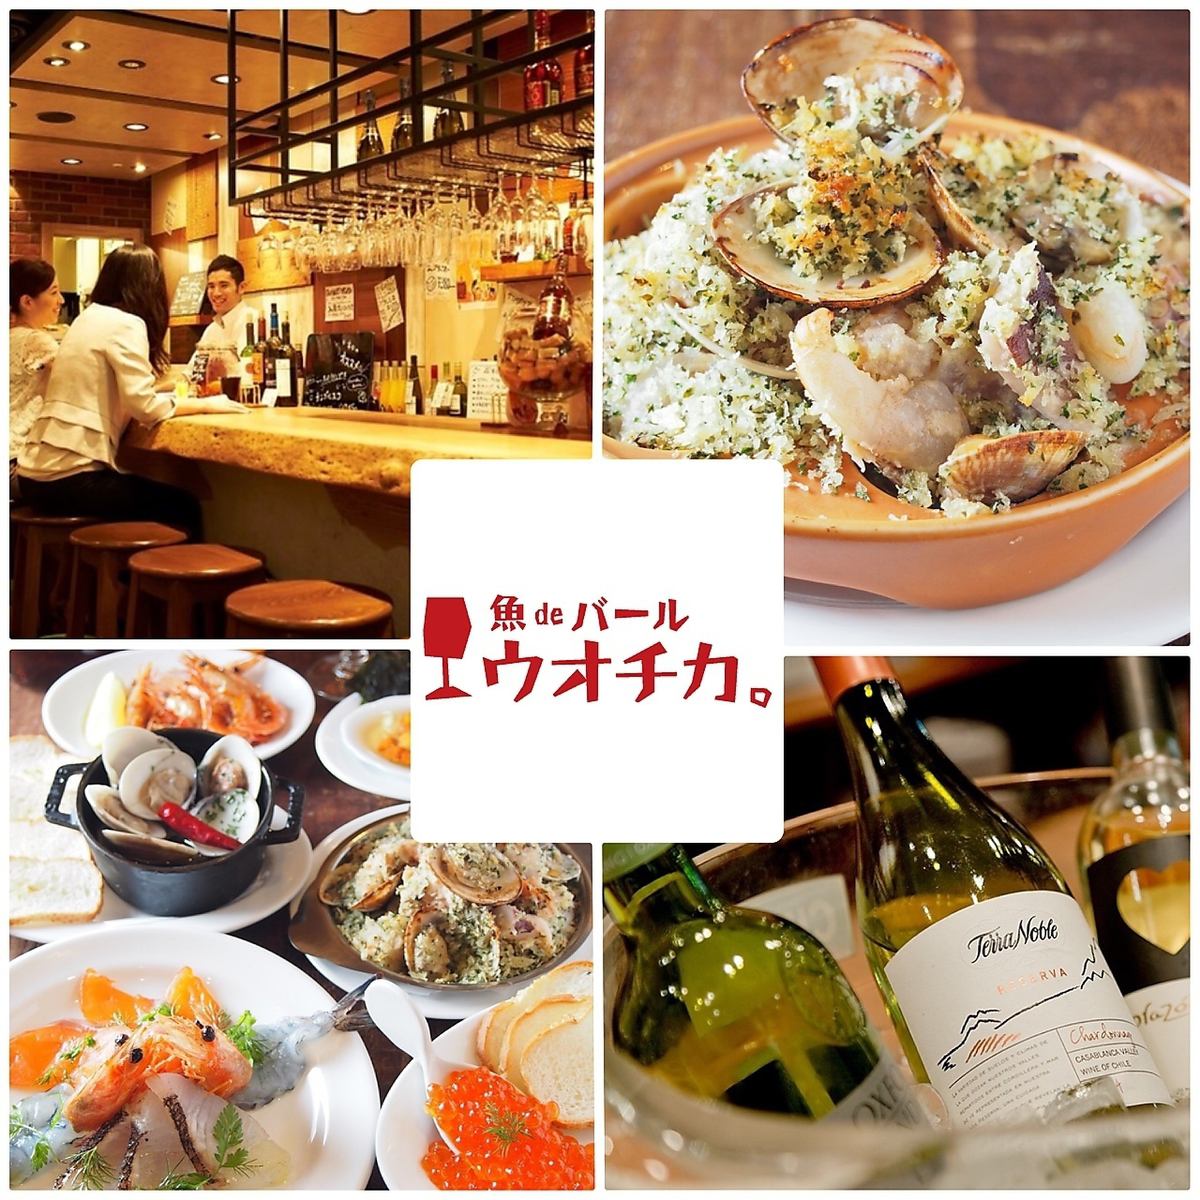 Convenient access! [Soon from Umeda Station] ■ Kobako seafood bar full of warmth of old trees ■